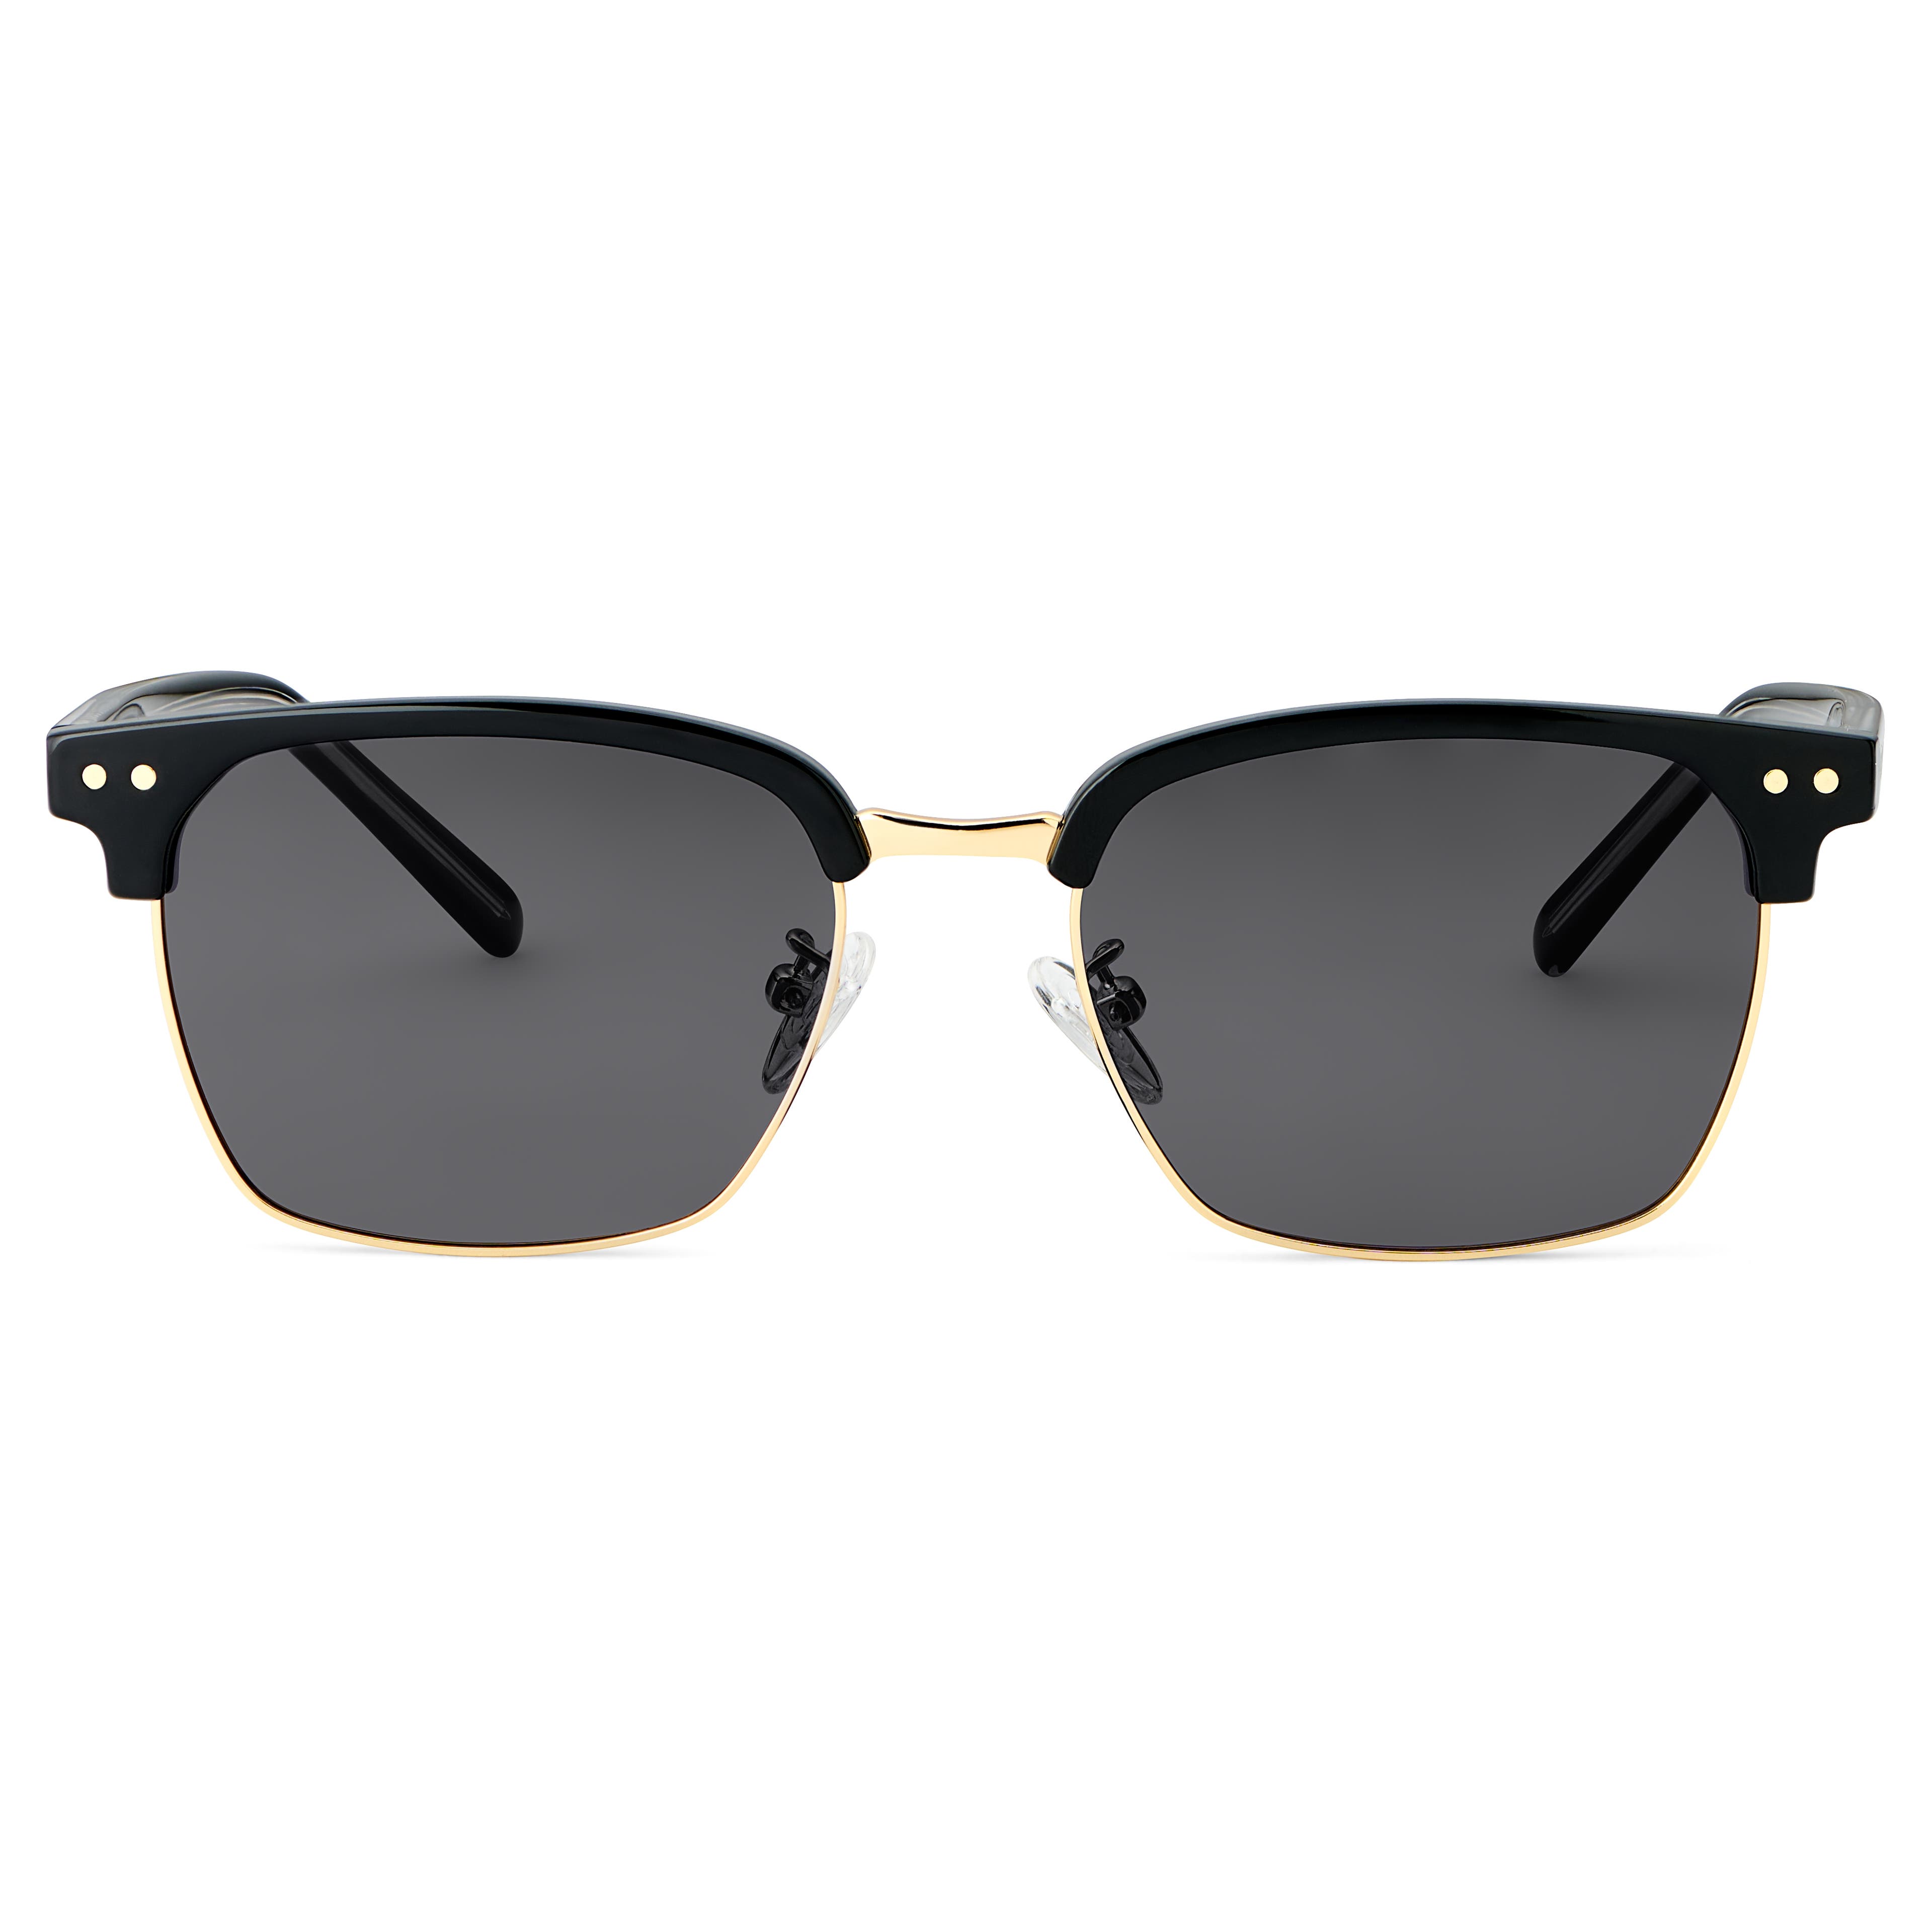 Black & Gold-Tone Stainless Steel Square Sunglasses